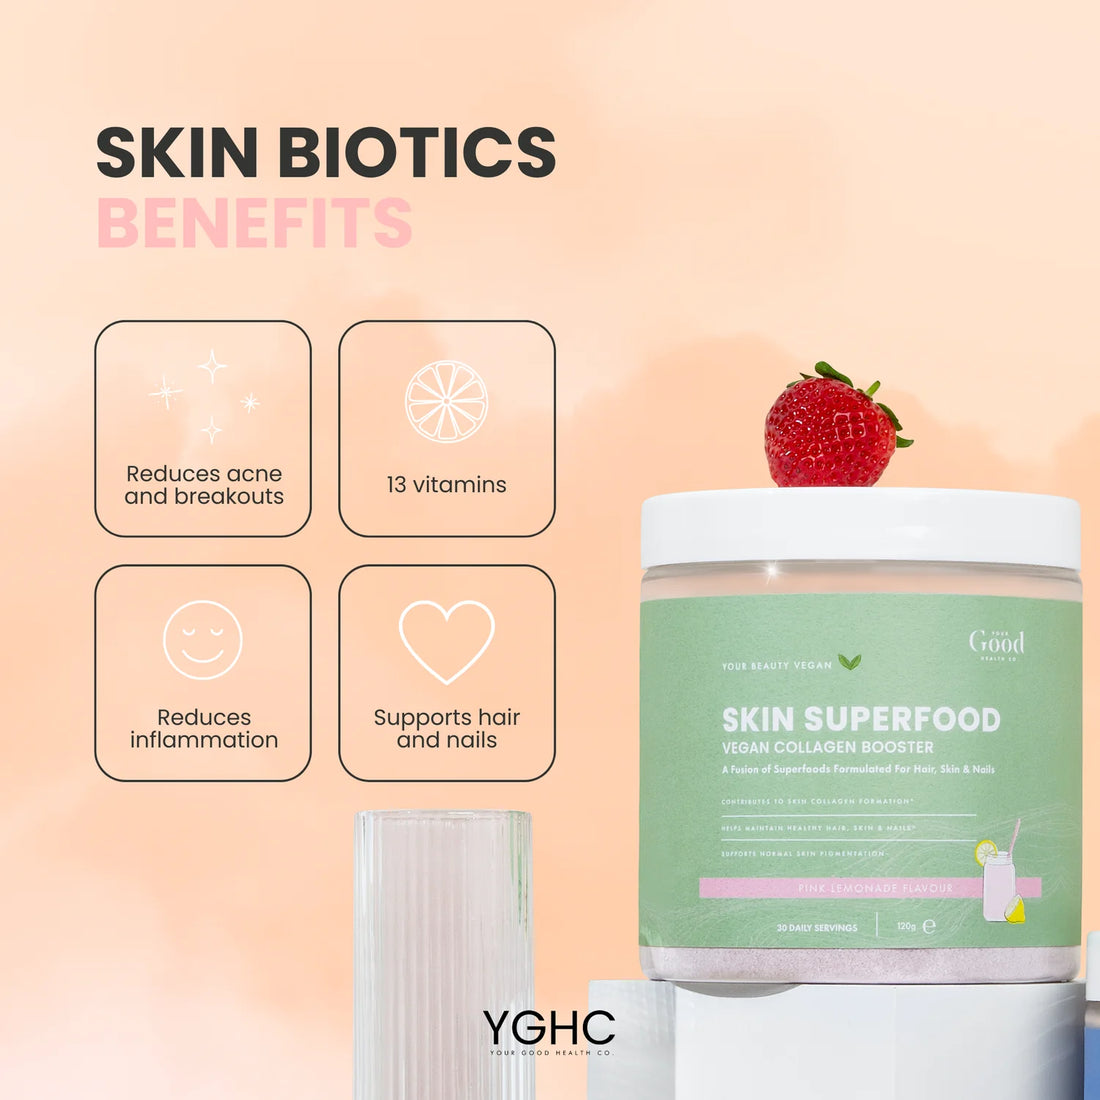 90 Day Skin Superfood